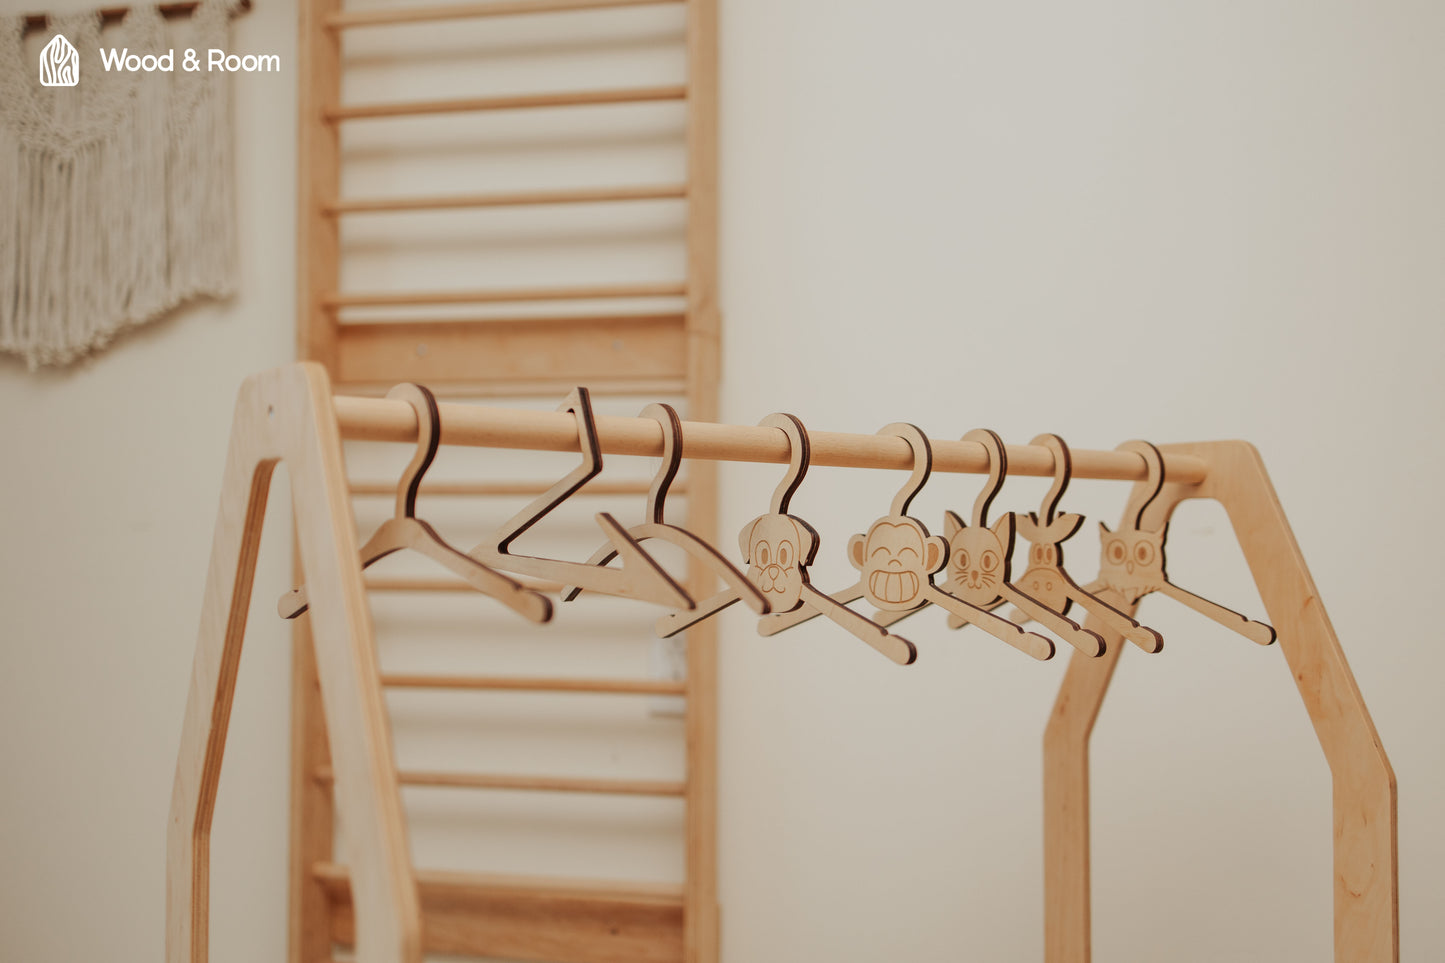 Kids Wooden Hangers HIGH QUALITY –